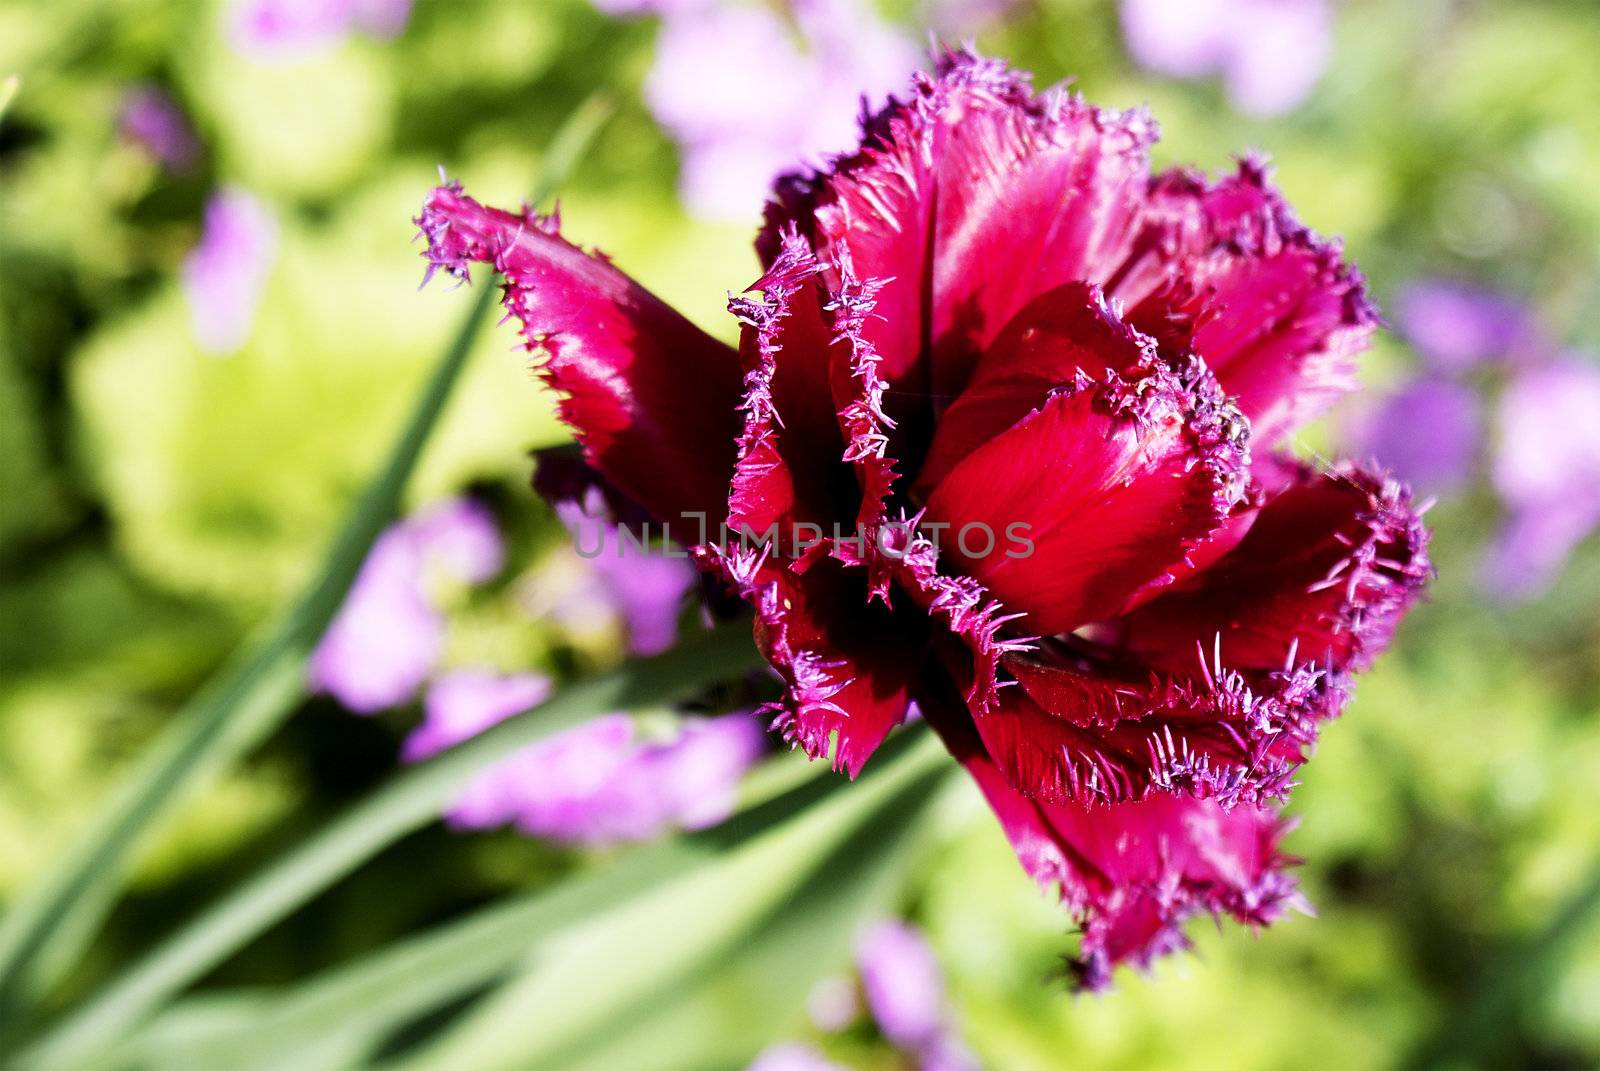 Spring red tulips over green meadow background